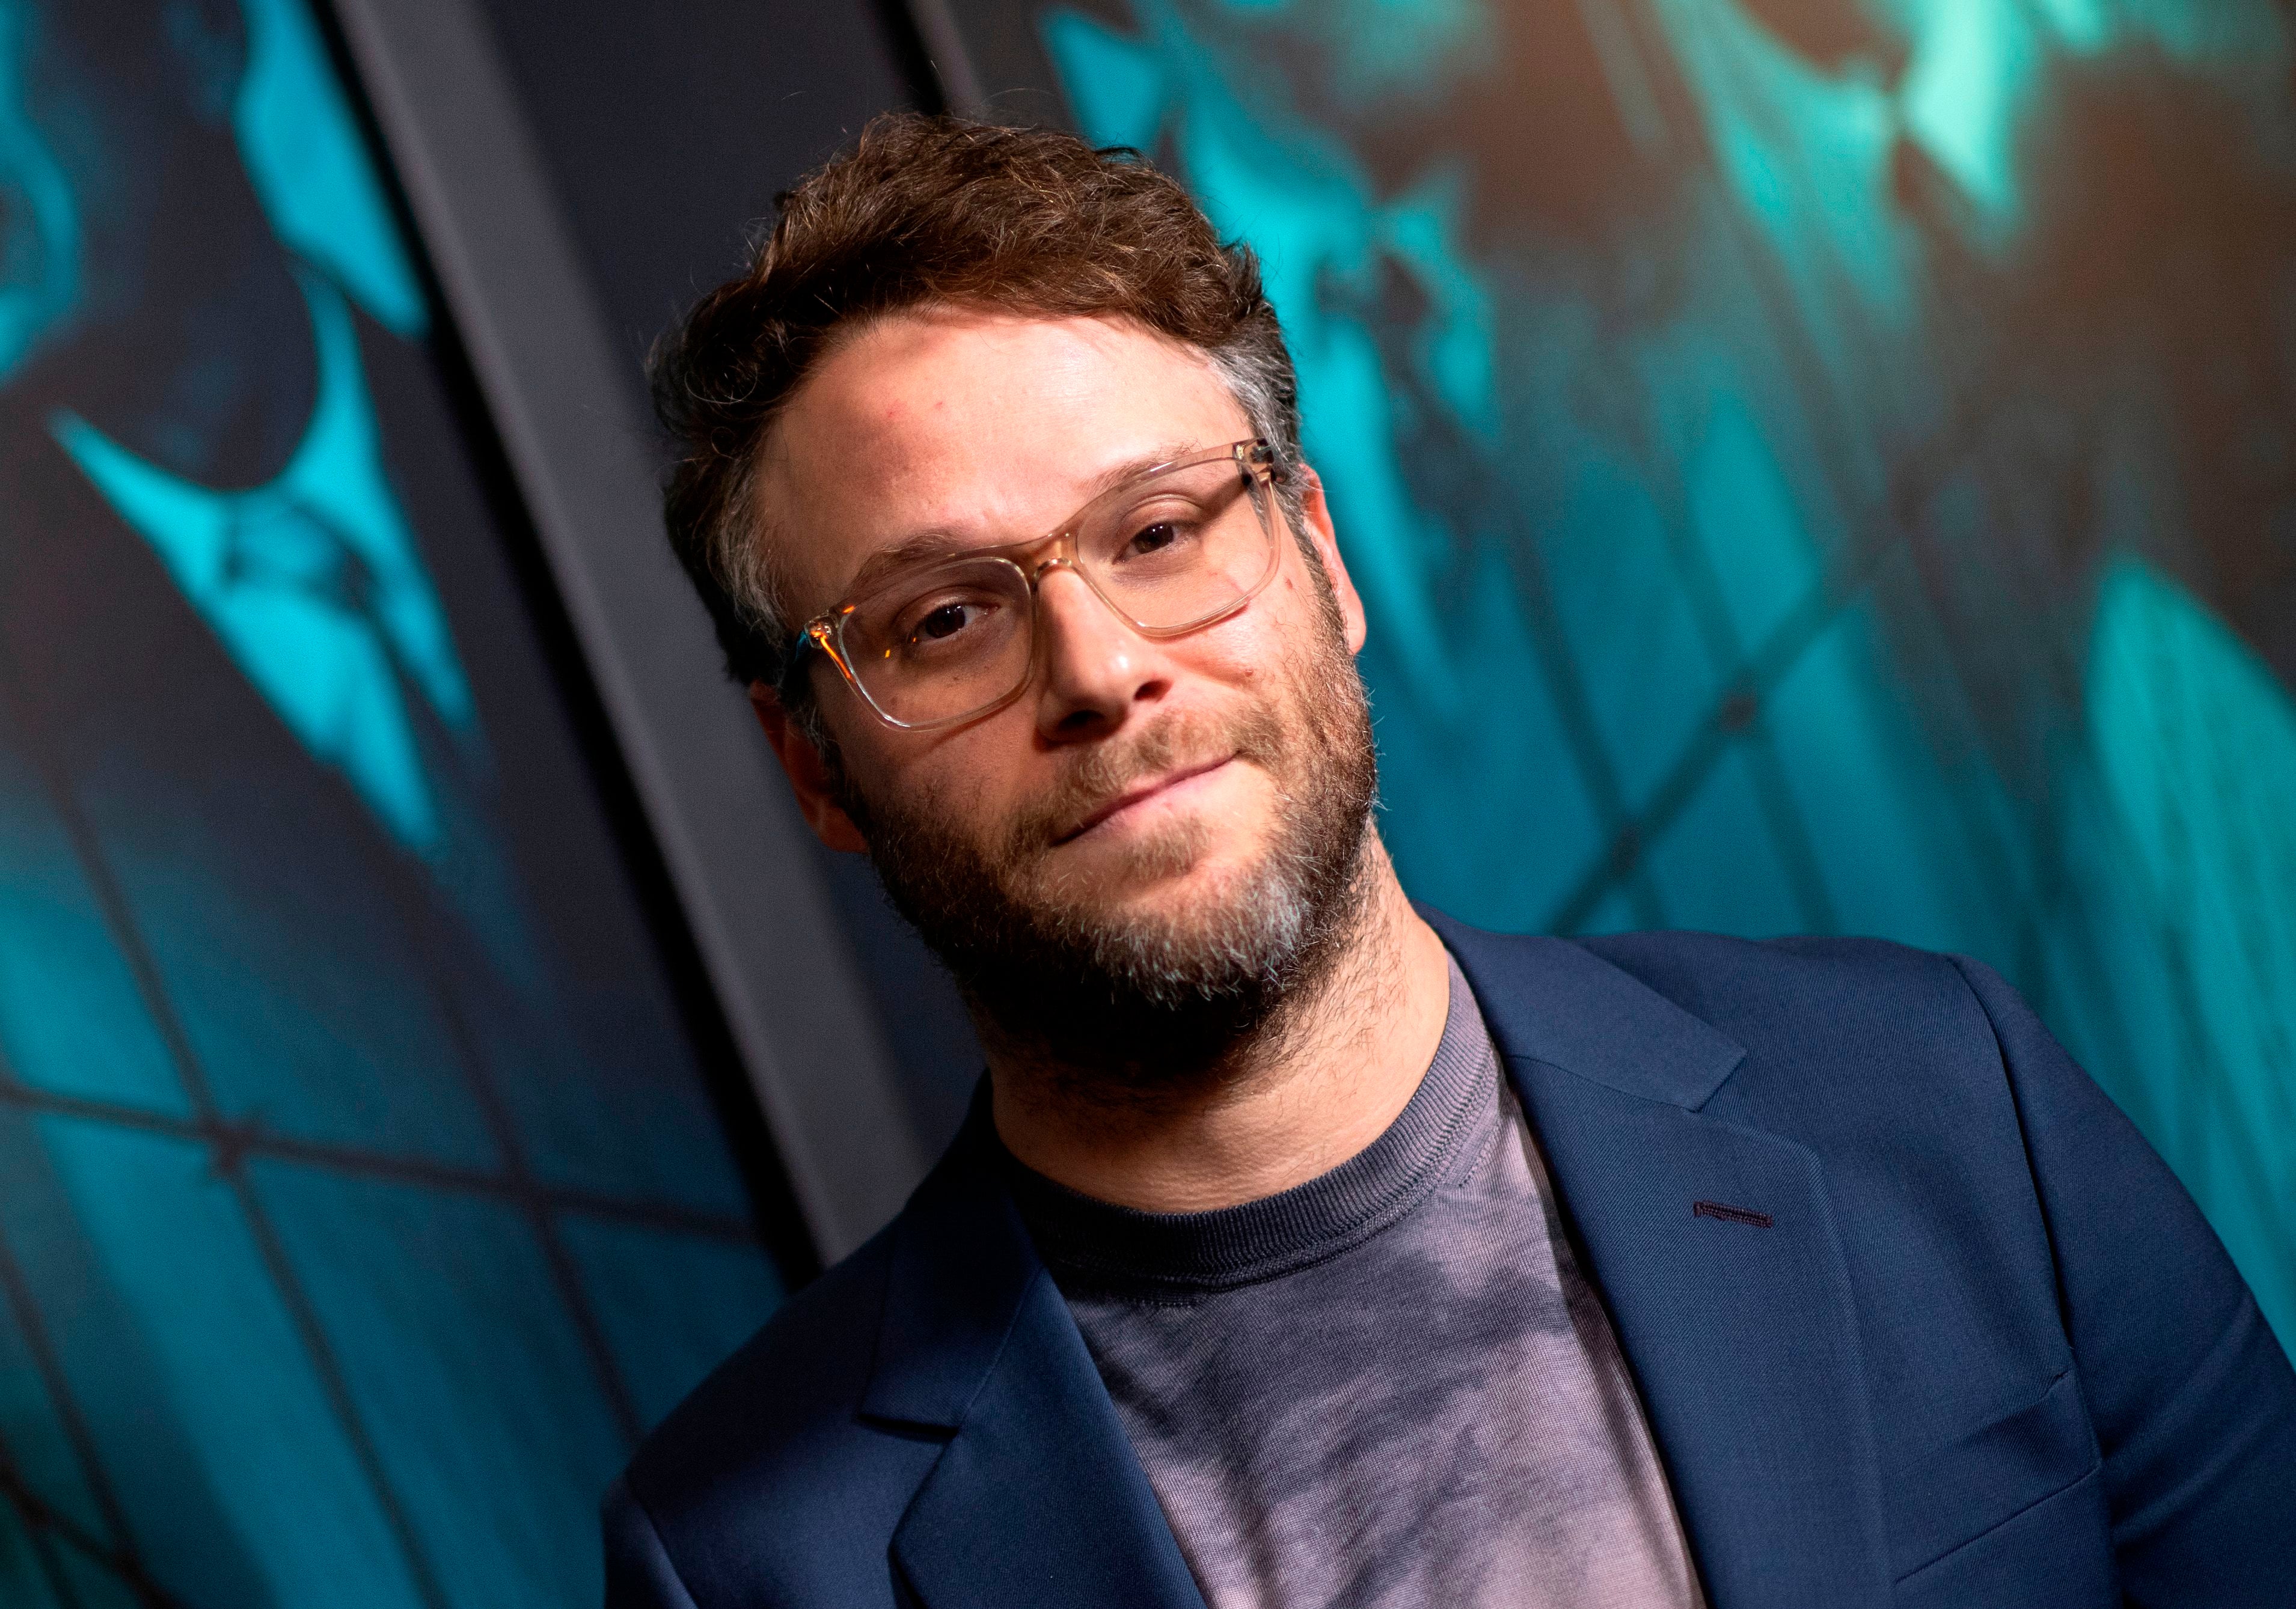 Seth Rogen’s anecdotal memoir ranges from Hollywood gossip to weed lore